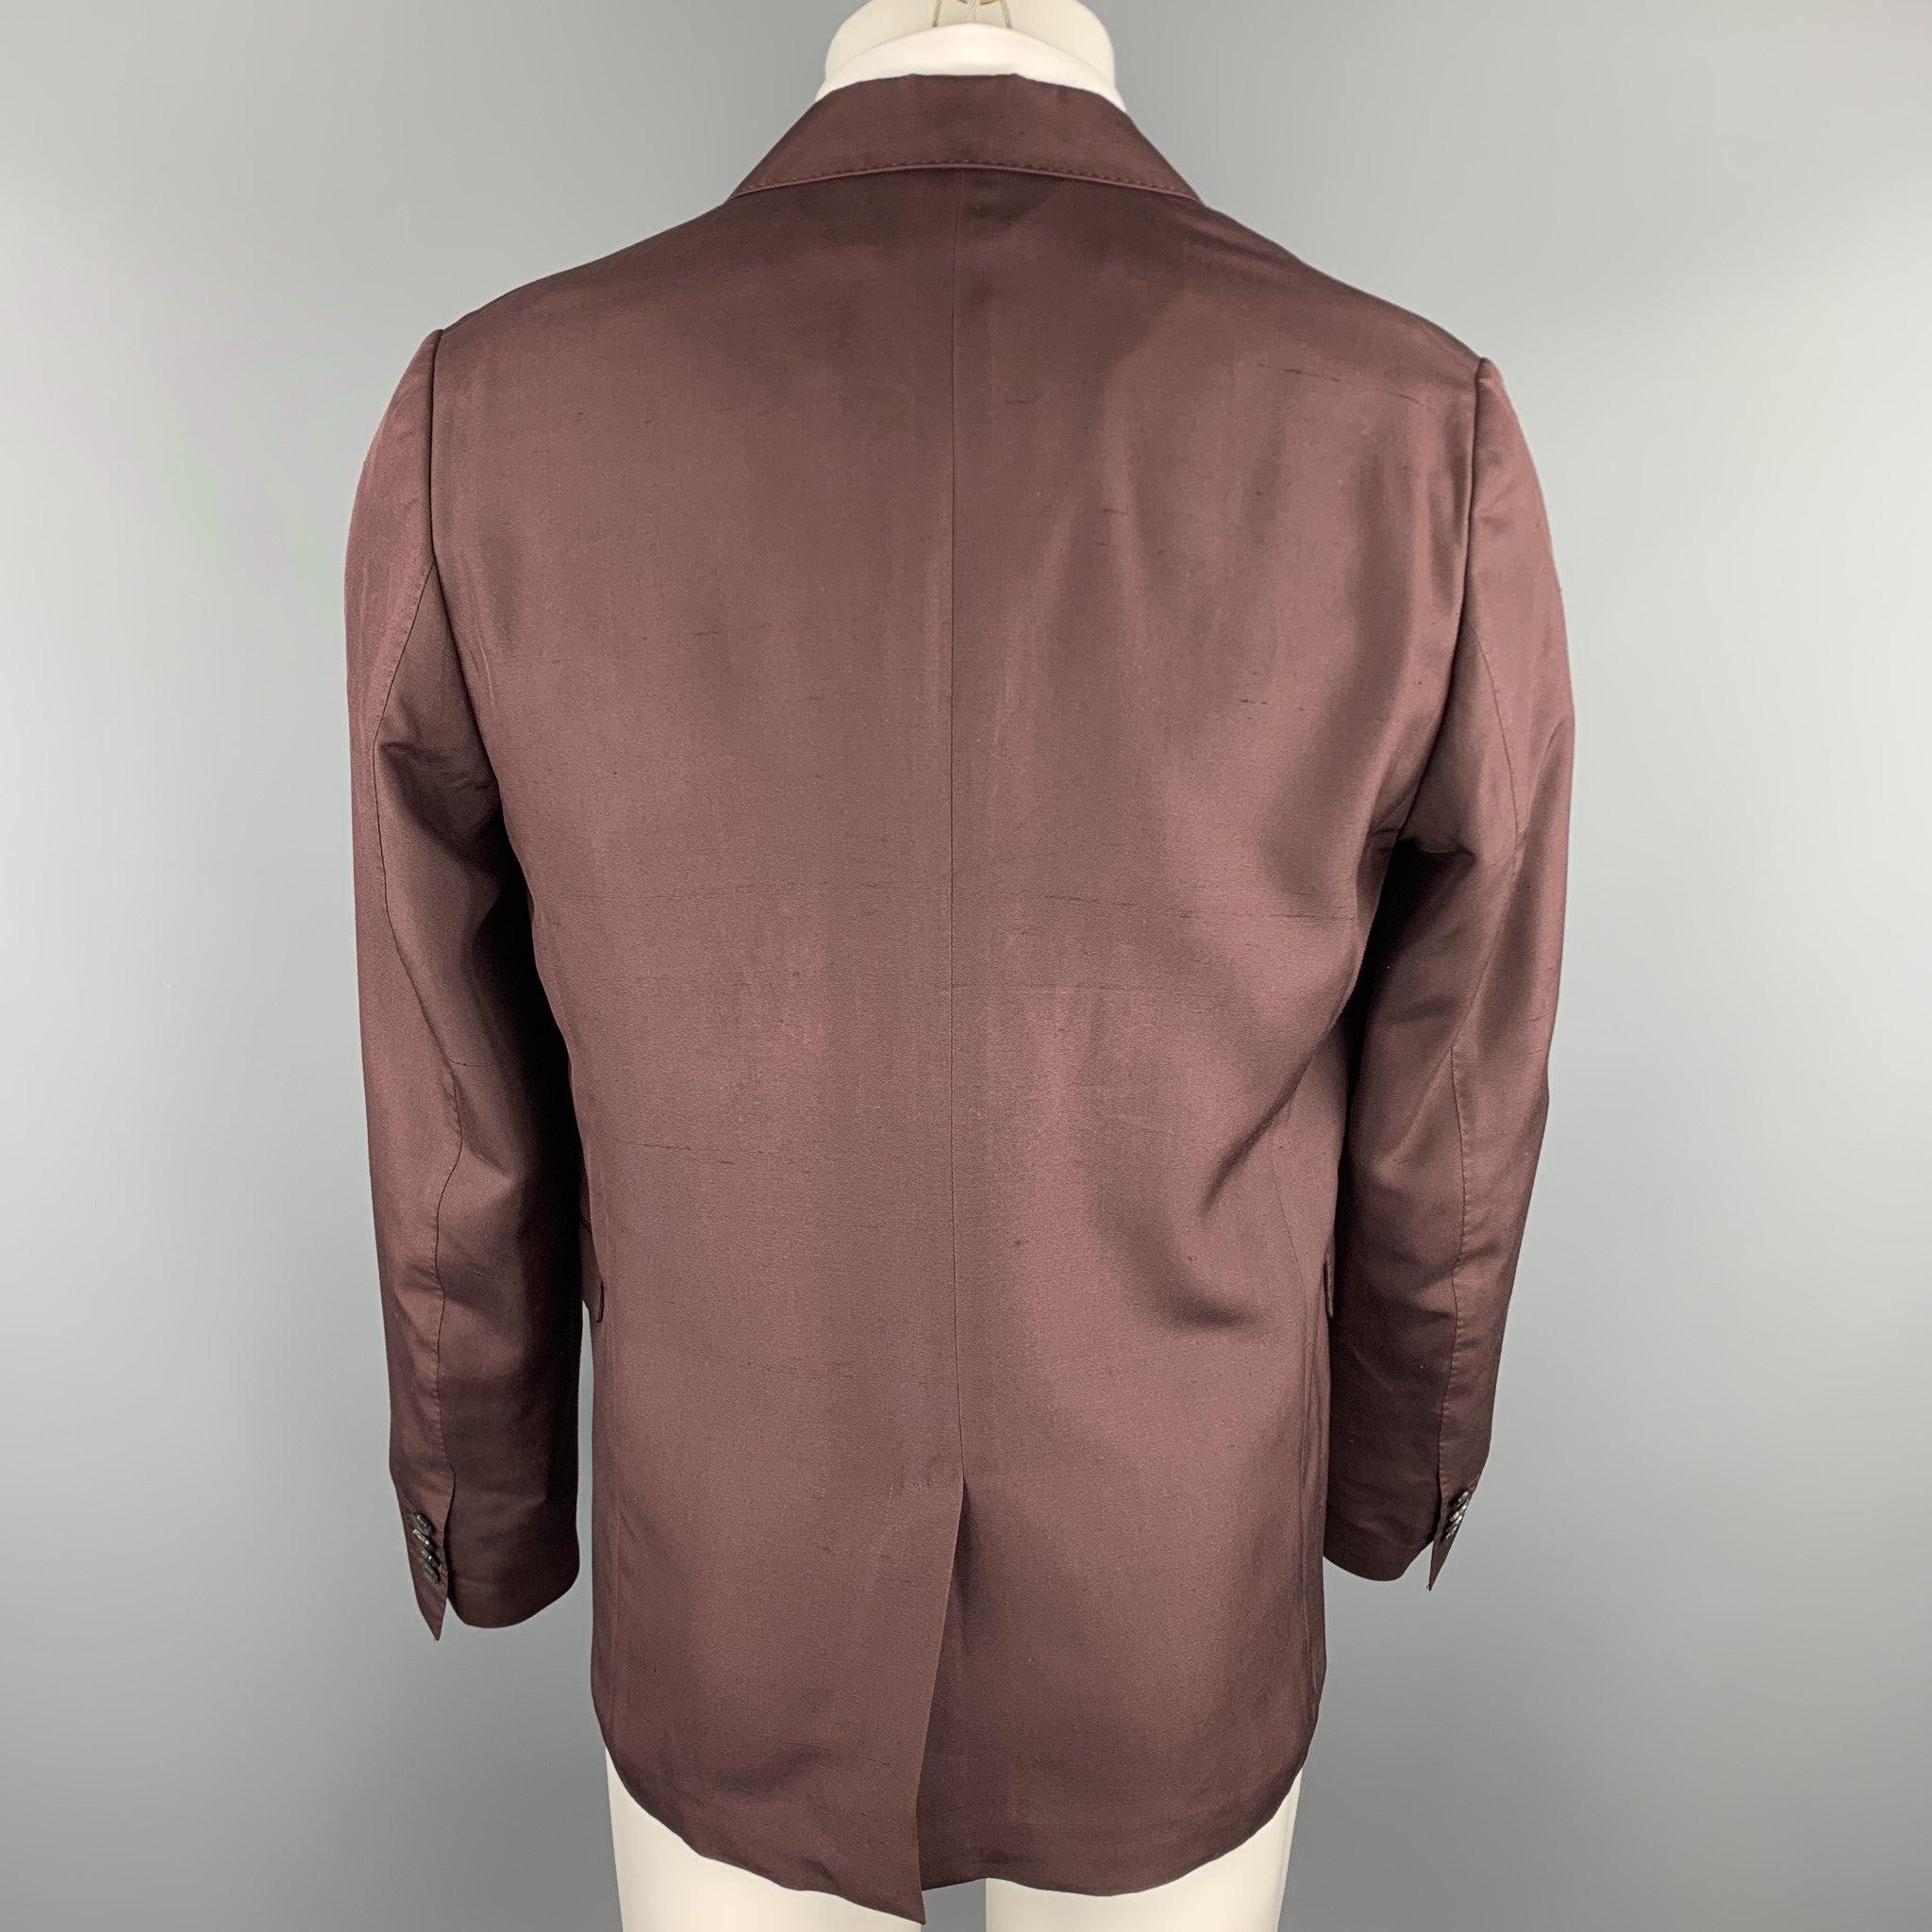 VALENTINO Size 38 Burgundy Silk Notch Lapel Sport Coat In Good Condition For Sale In San Francisco, CA